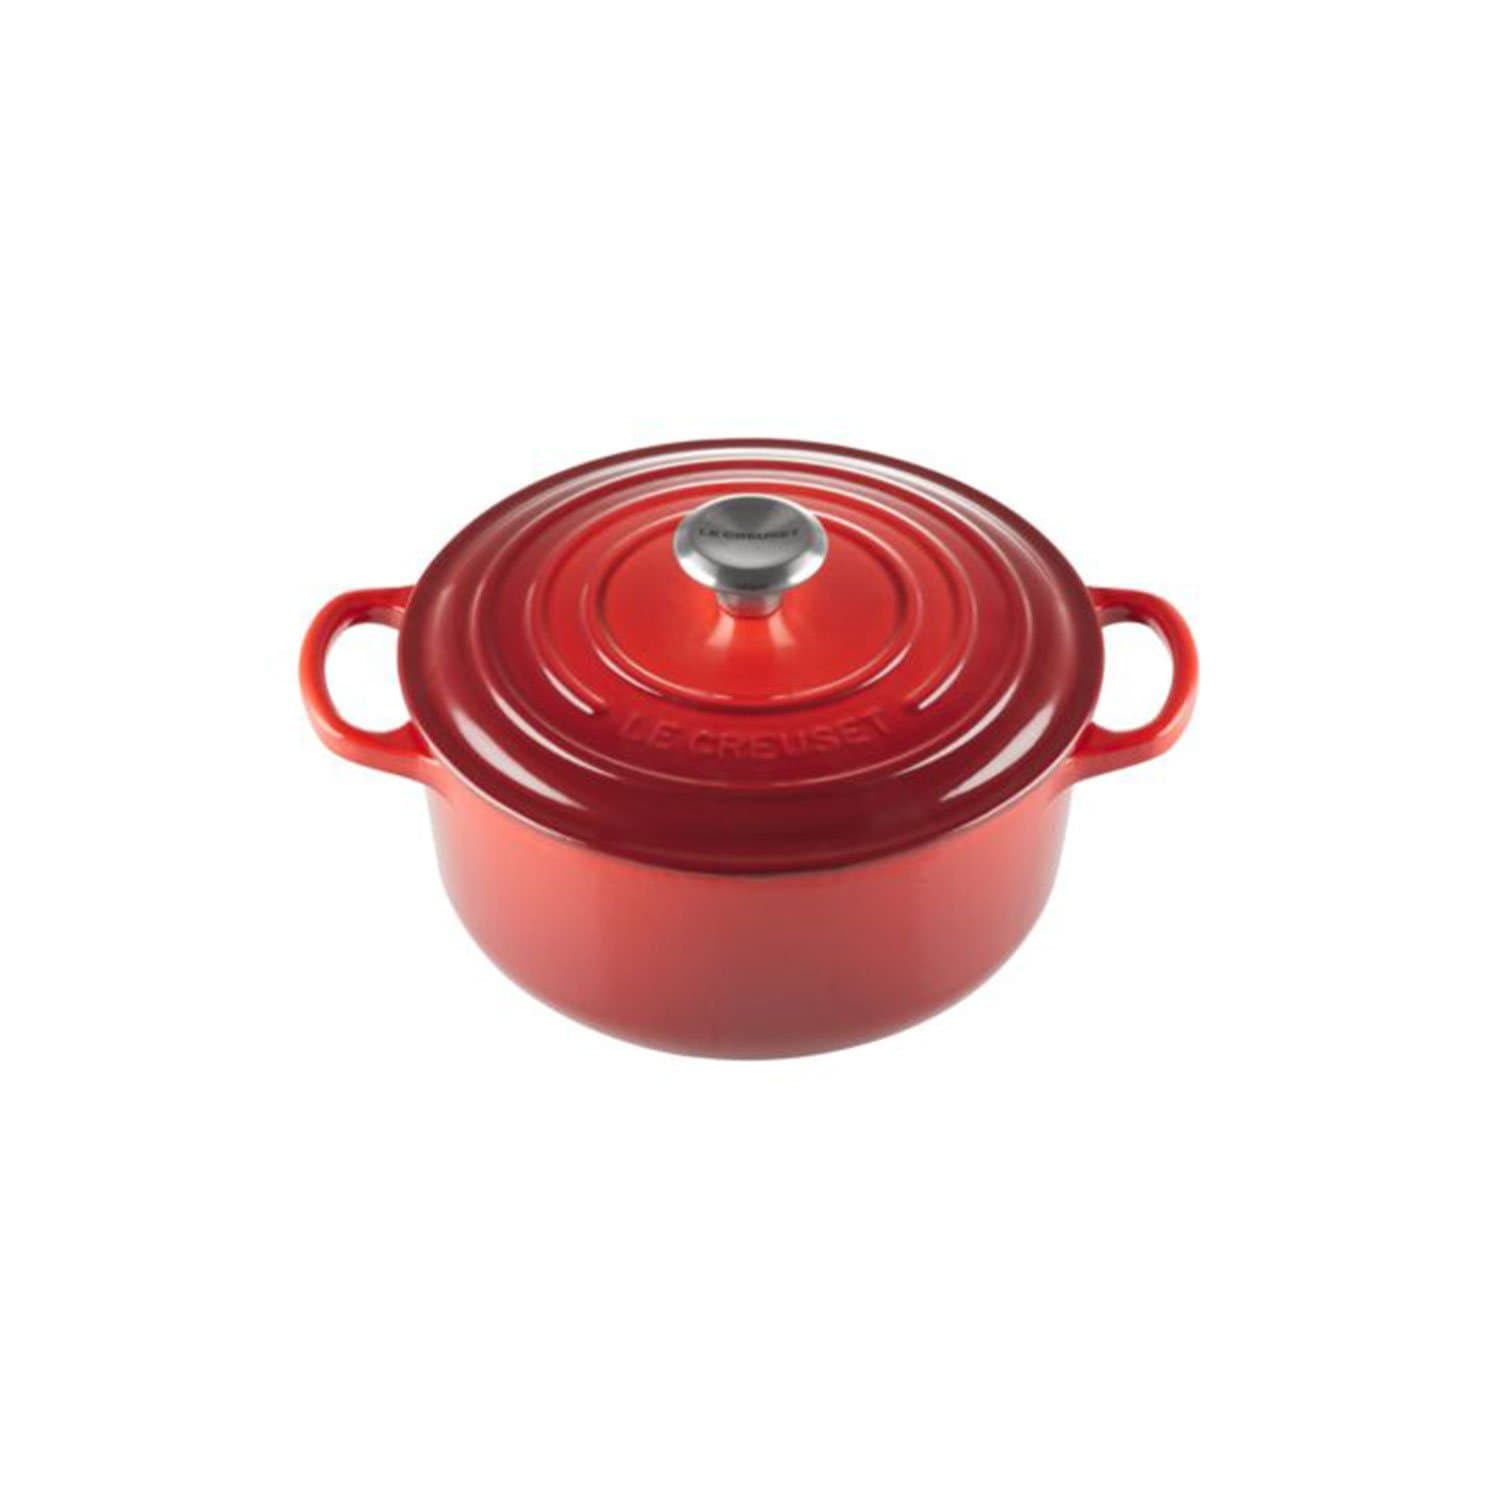 LE CREUSET ROUND FRENCH OVEN 22CM CHERRY RED - 21177220602430